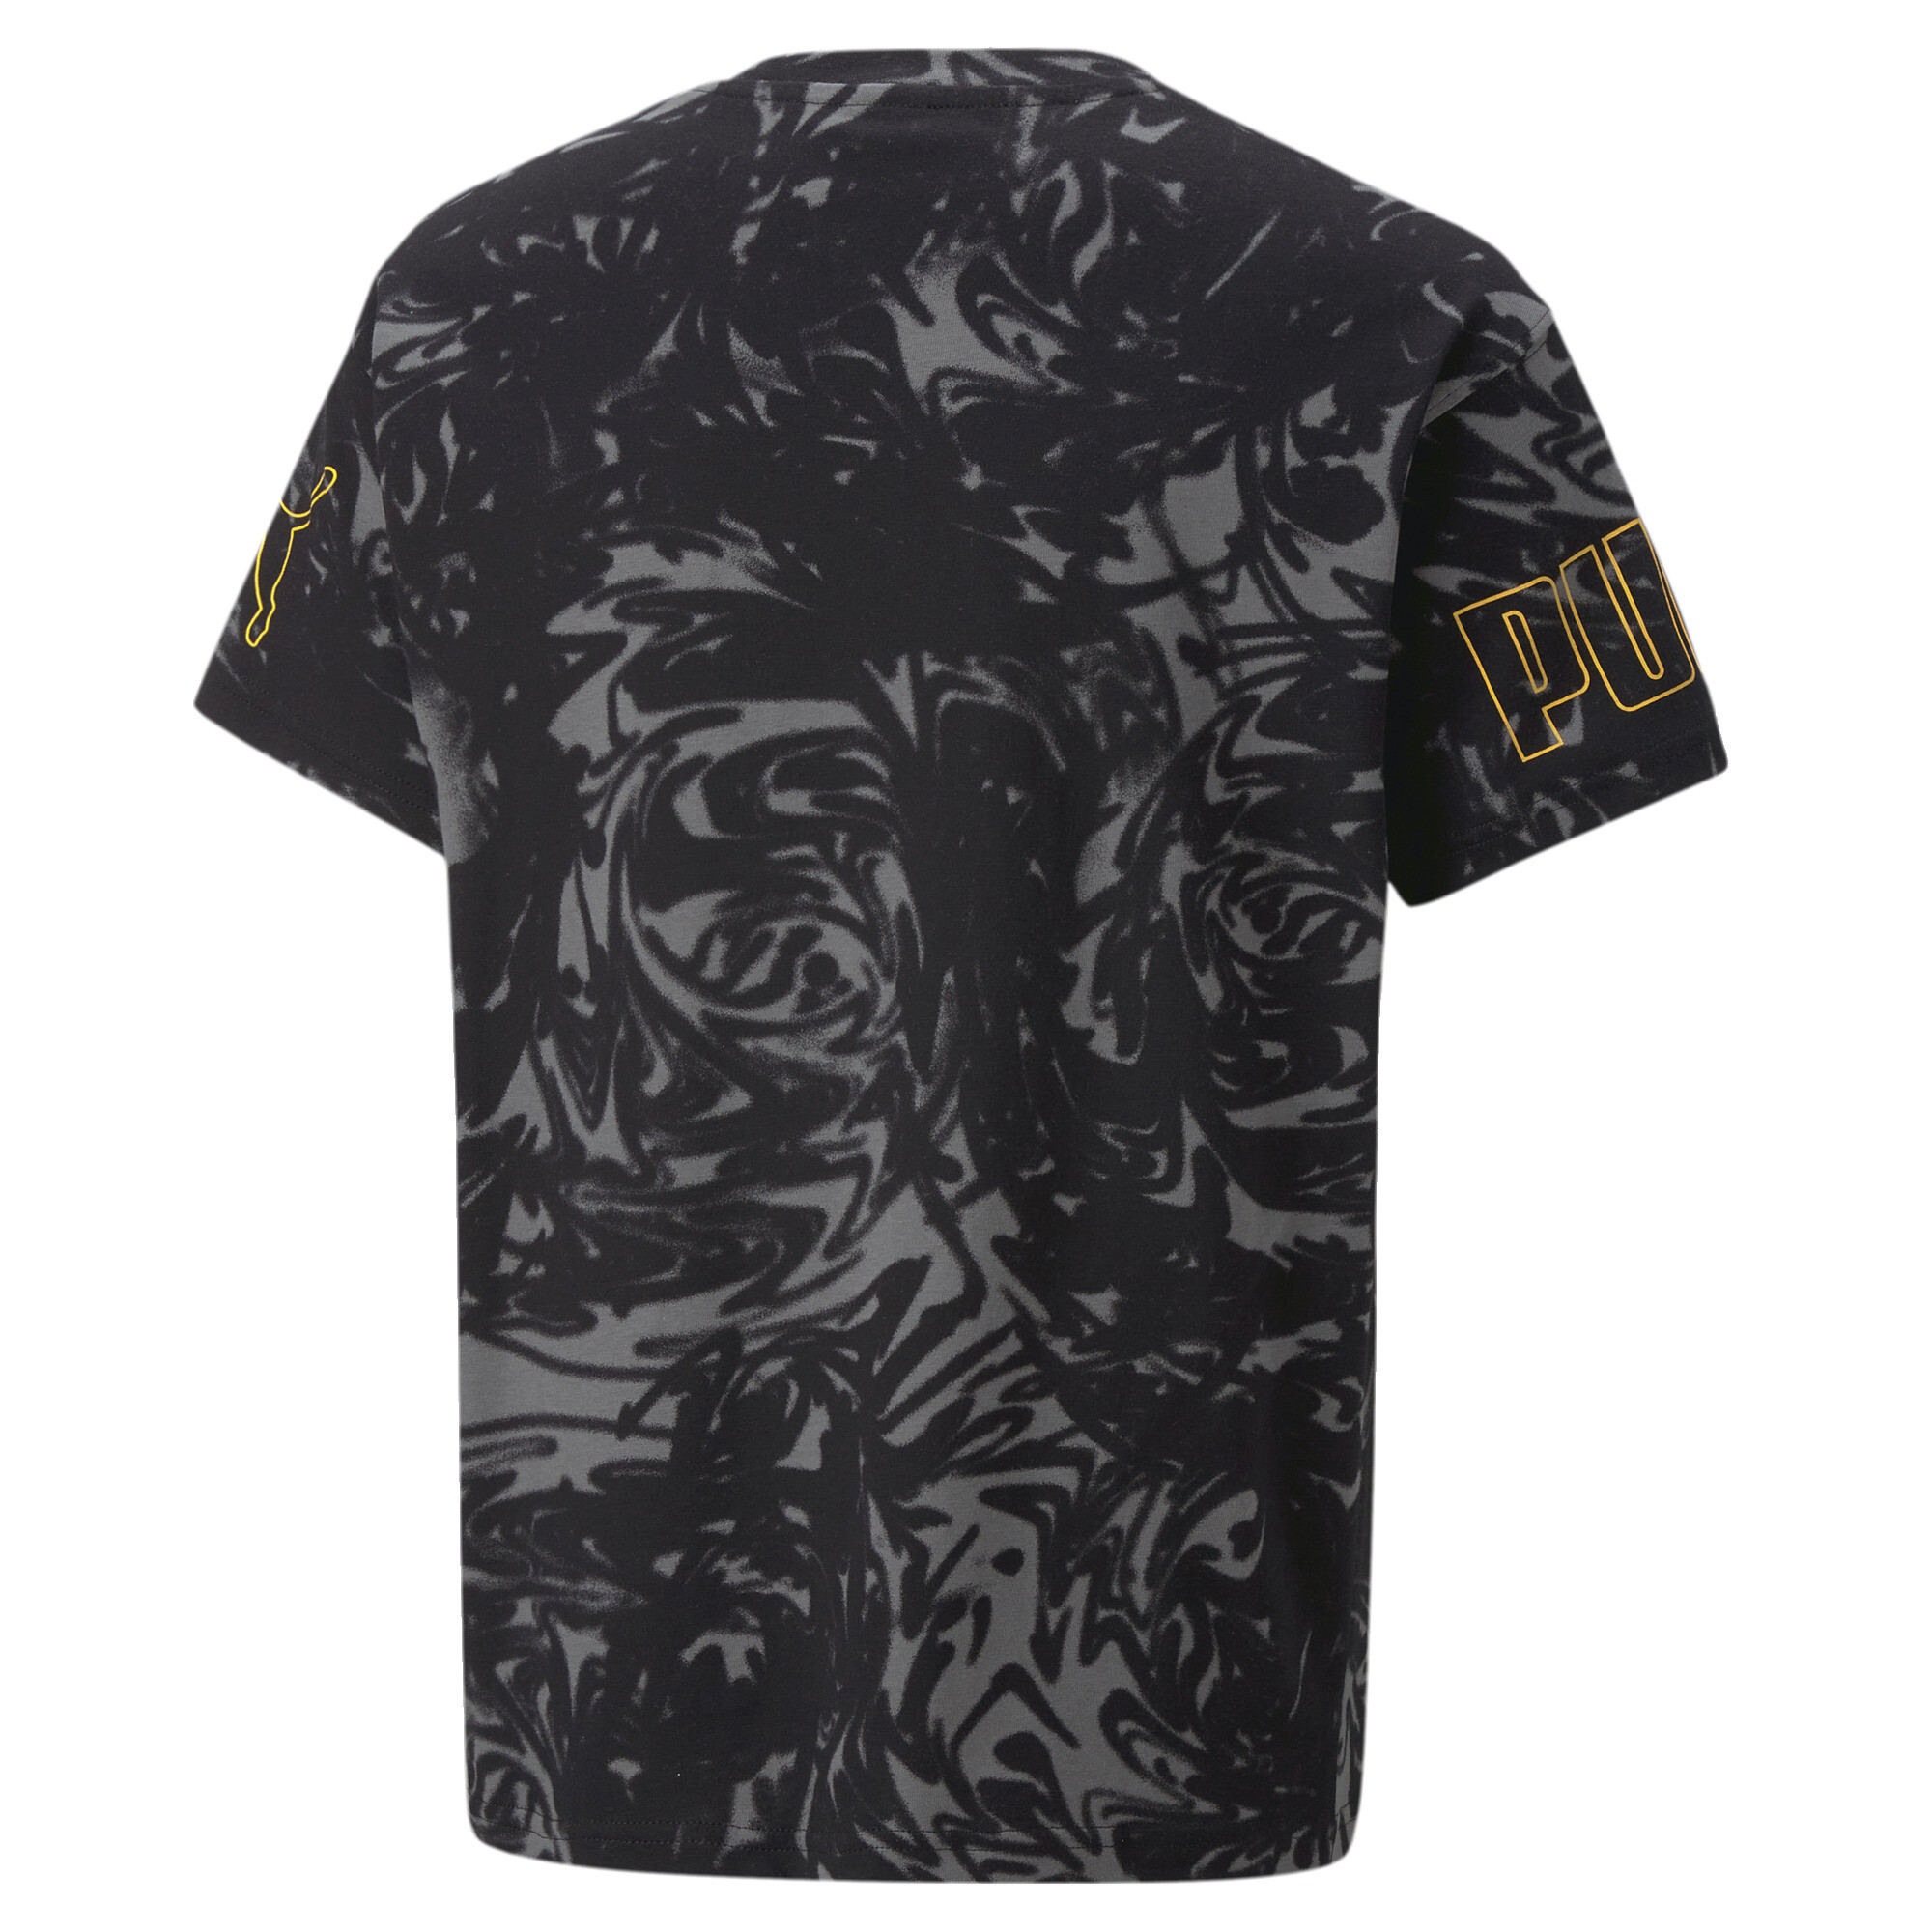 PUMA POWER SUMMER Printed T-Shirt In Black, Size 9-10 Youth